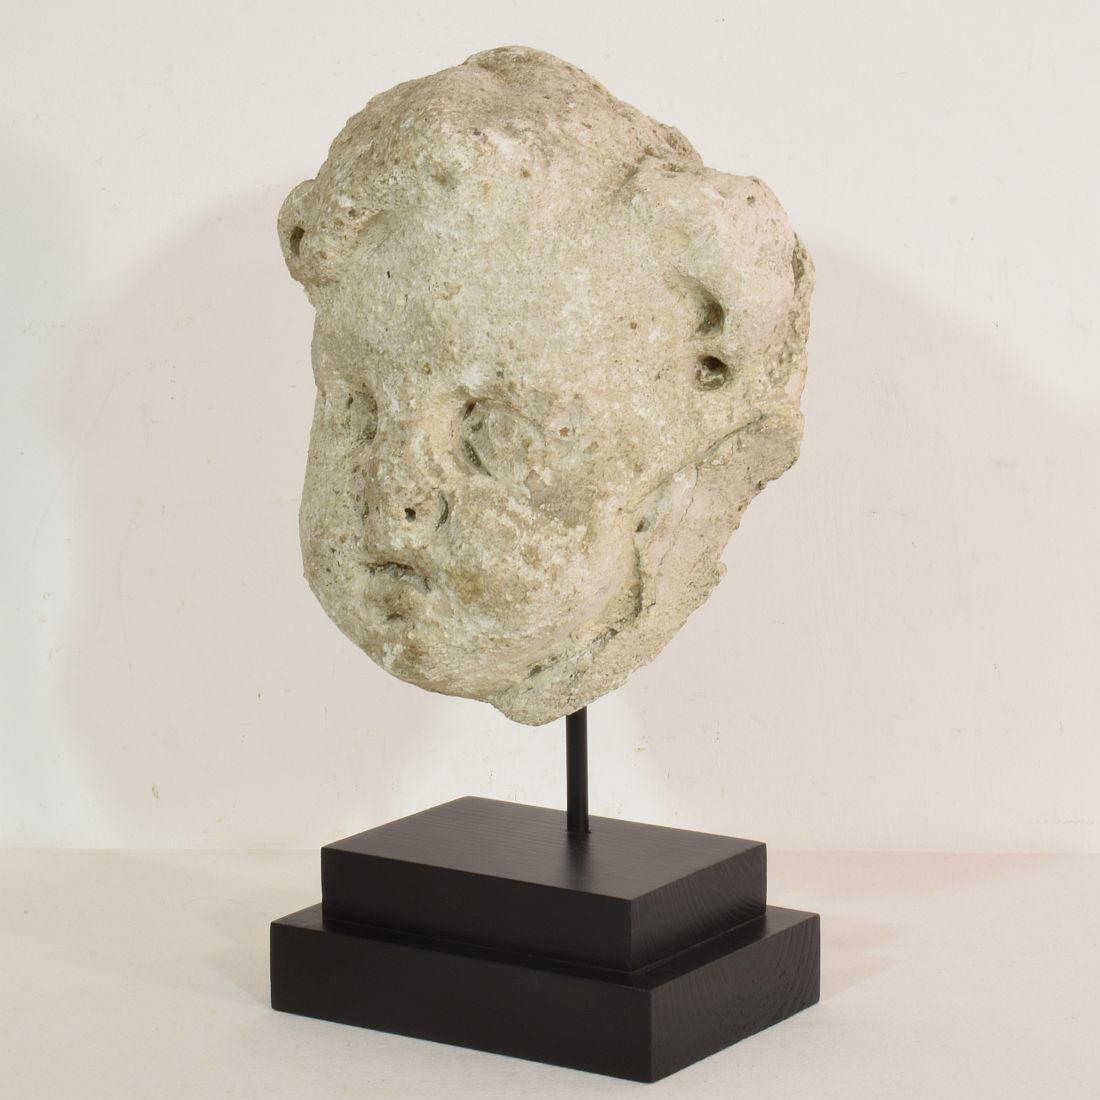 Baroque 17th-18th Century French Weathered Stucco/ Stone Paste Fragment of an Angel Head